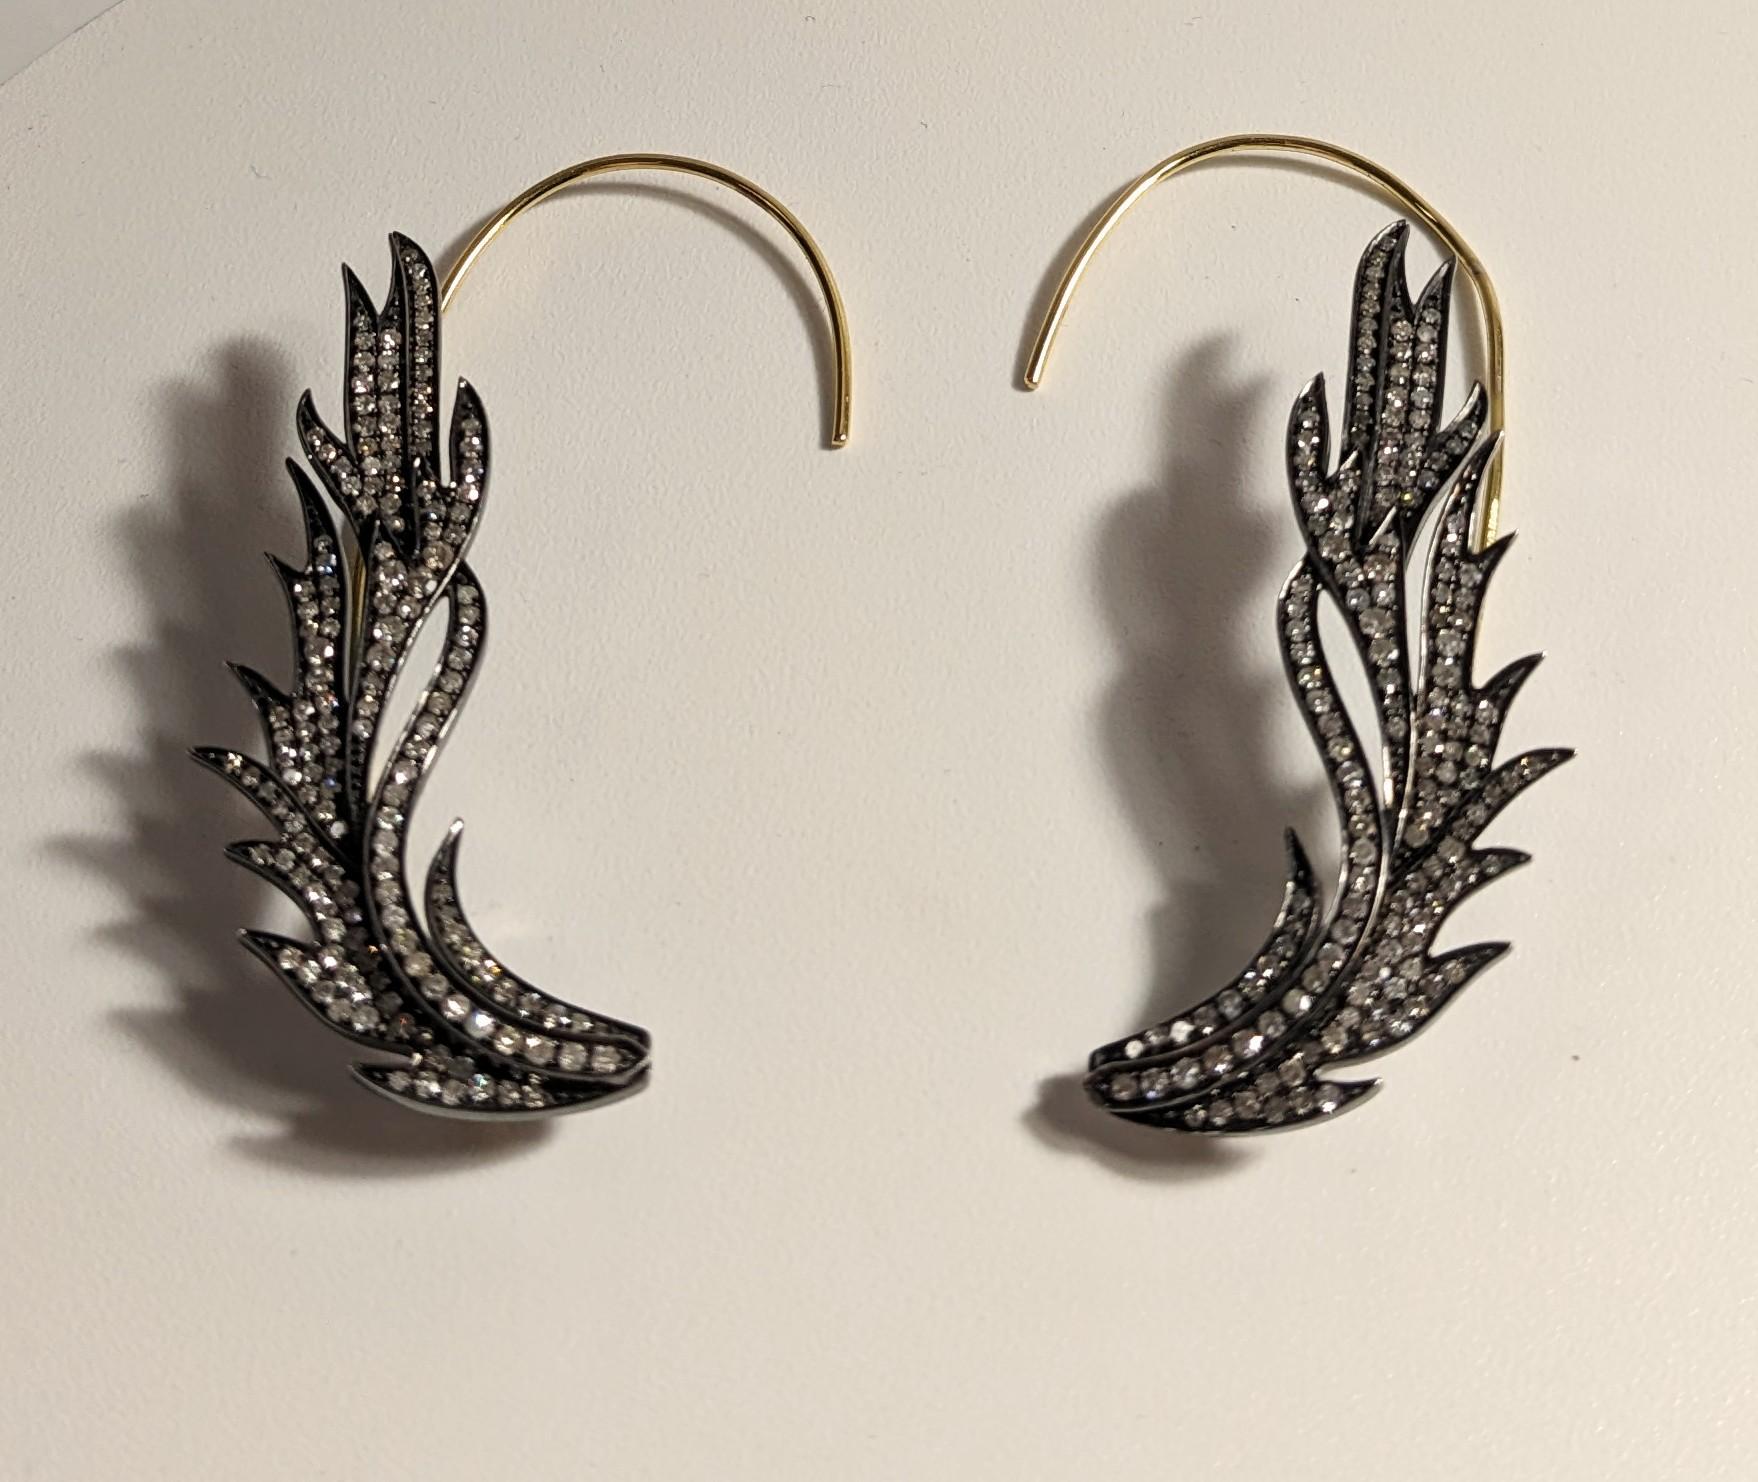 Feather Cuff Earrings in 18k Gold, Silver, and Diamonds 
Earring in 18K gold with a total weight of 2.10 g, silver 8.47 g and 308 diamonds 1.97 ct

◘ Weight 10,96 gr.
◘ Gold Weight 2,10 gr.
◘ Silver Weight 8,47gr.
◘ Diamonds aprox 1,97 ct  
◘ Lenght